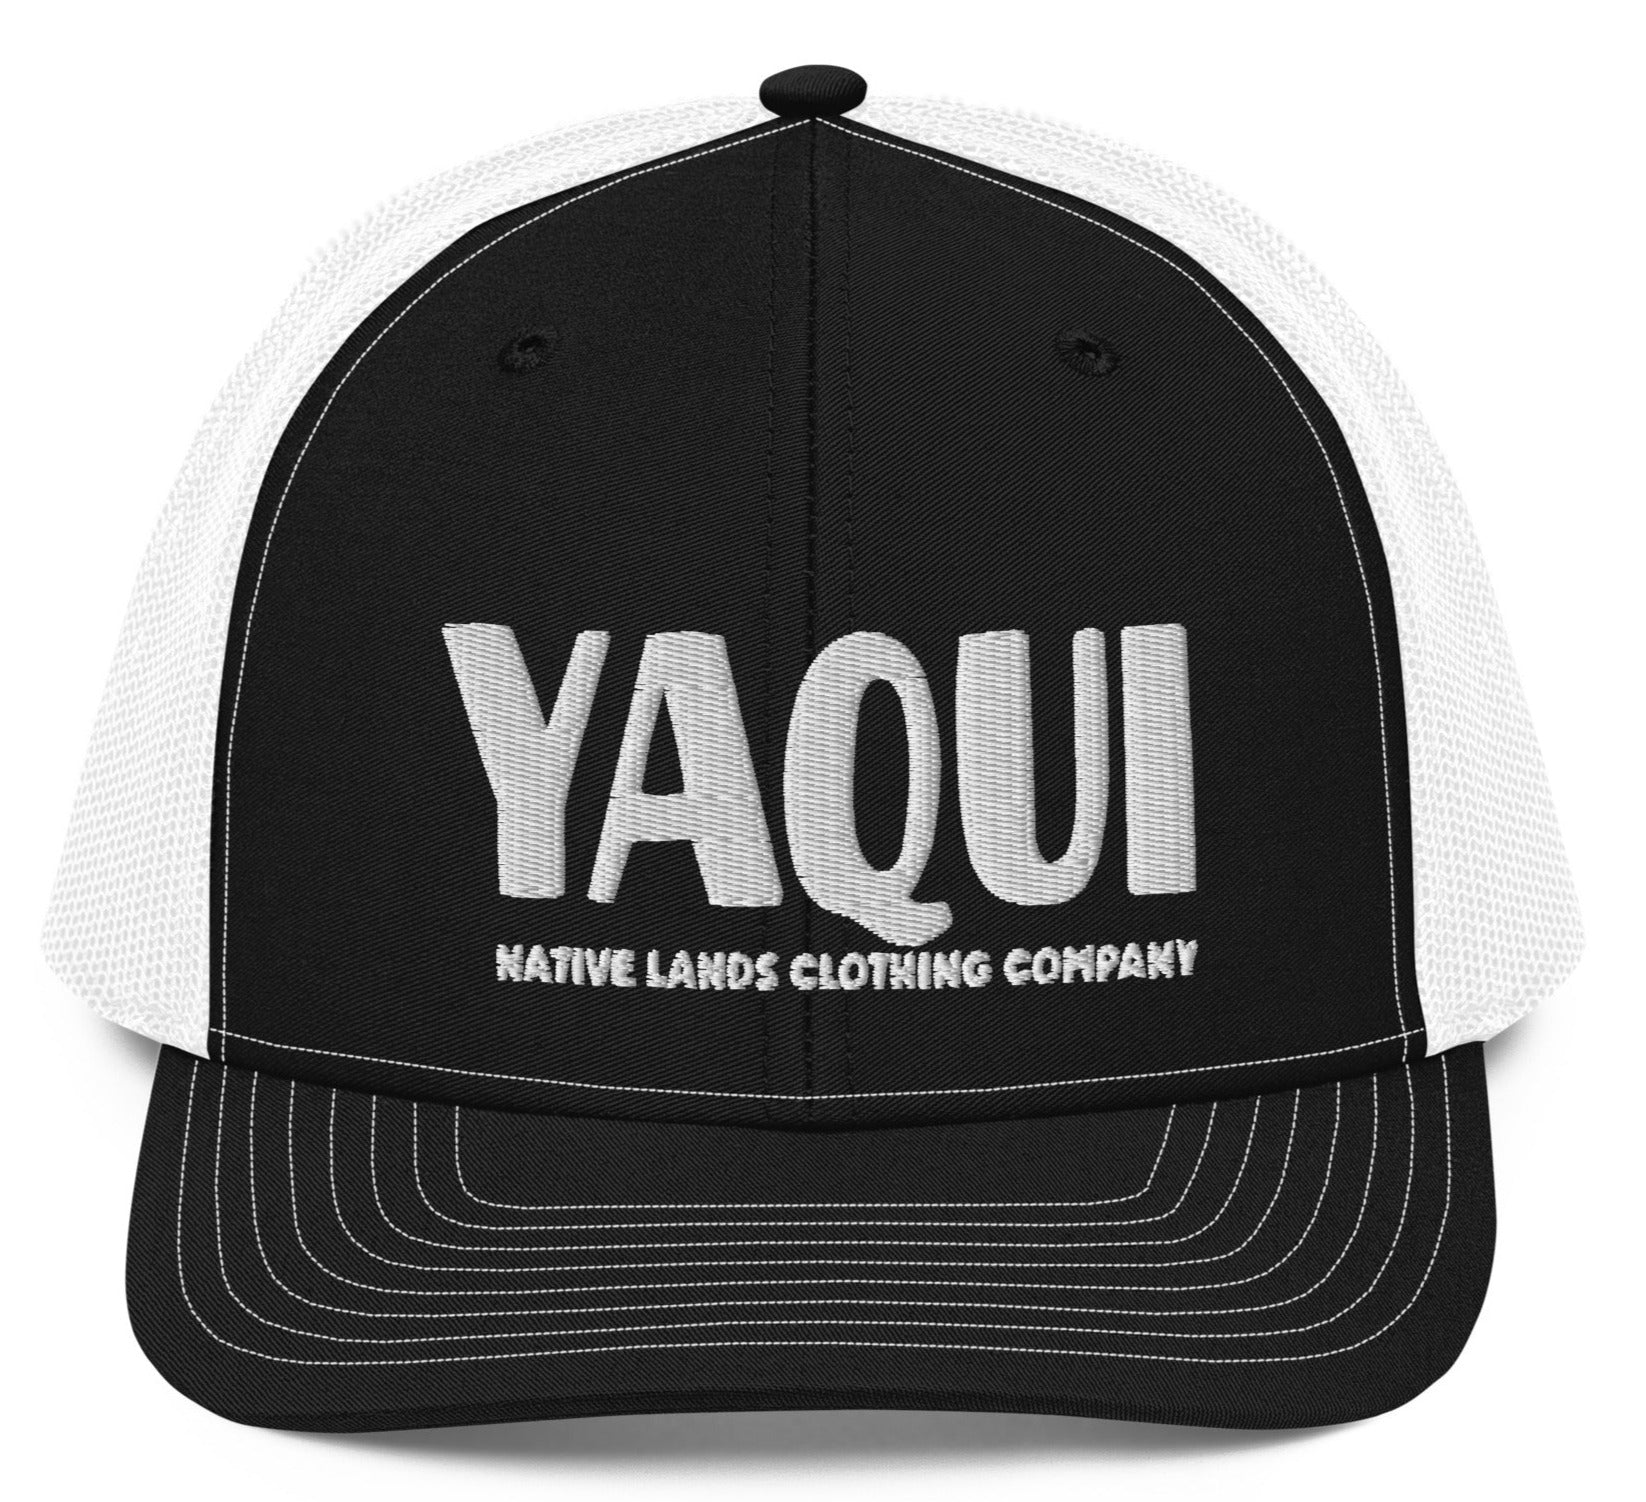 Yaqui Tribe Trucker Cap Embroidered Native American $ 25.50 Snapback Embroidered Baseball Cap Native Lands Clothing Company LLC